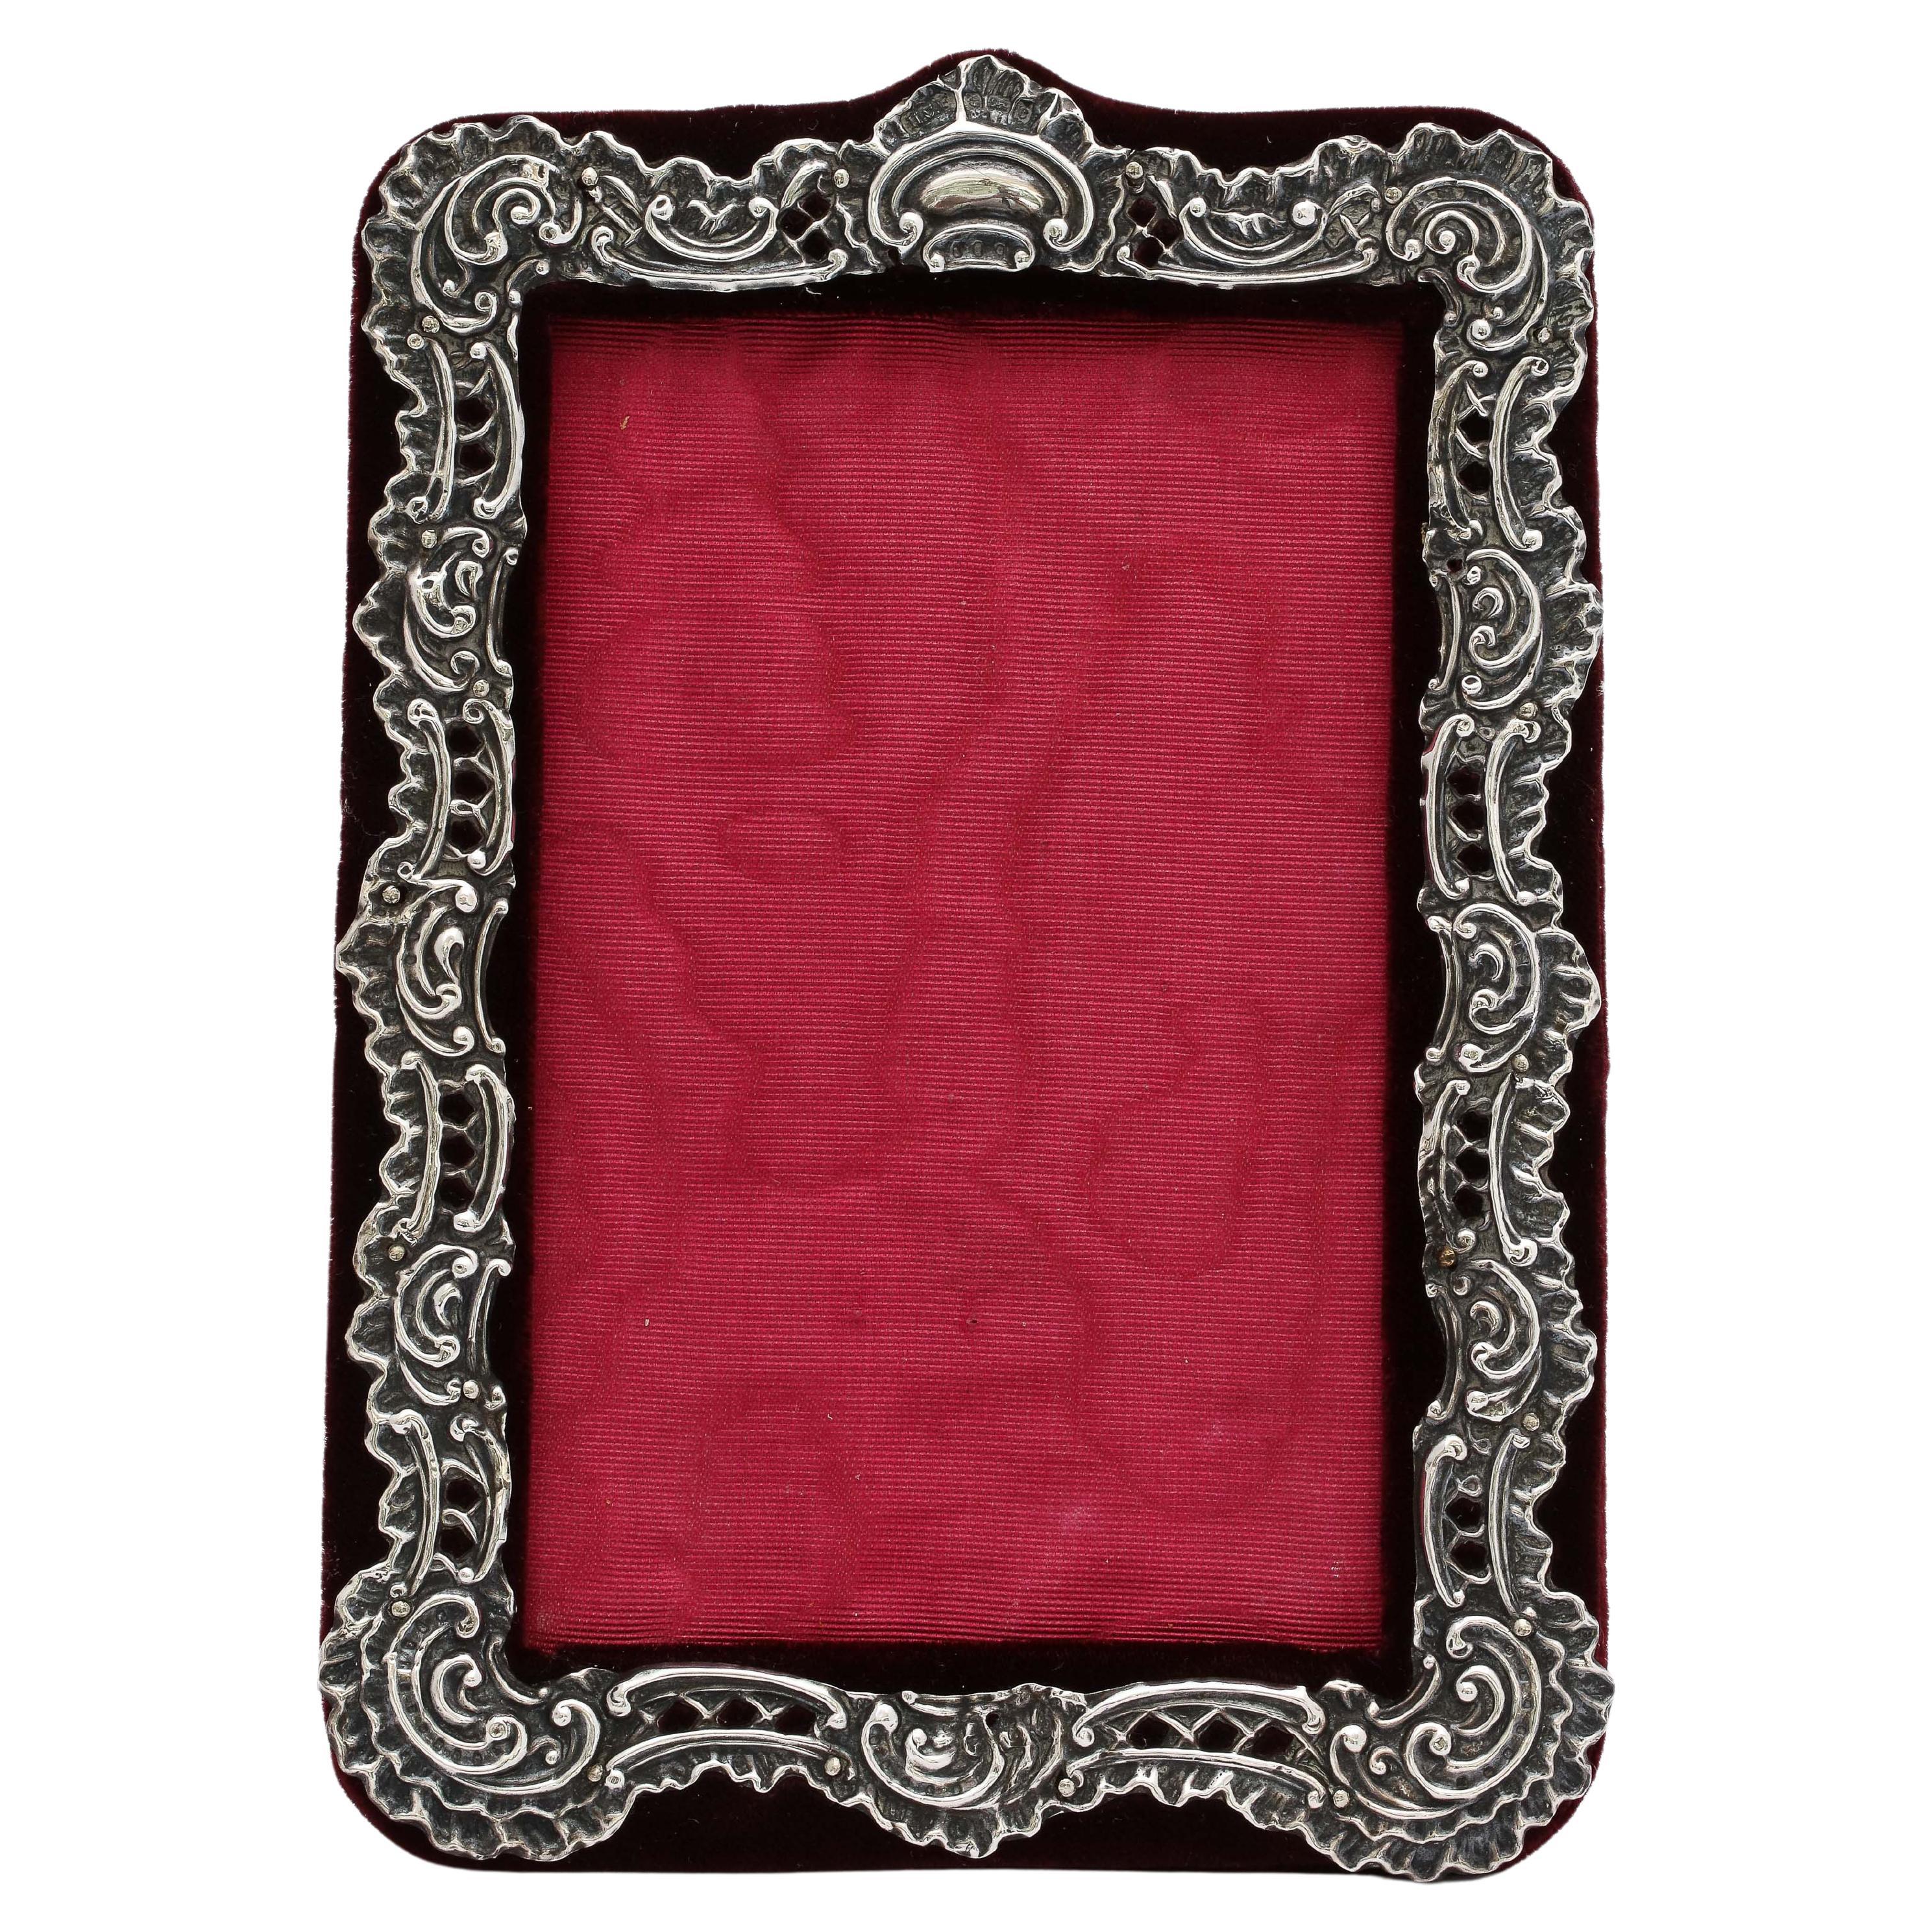 Edwardian Period Victorian Style Sterling Silver Picture Frame